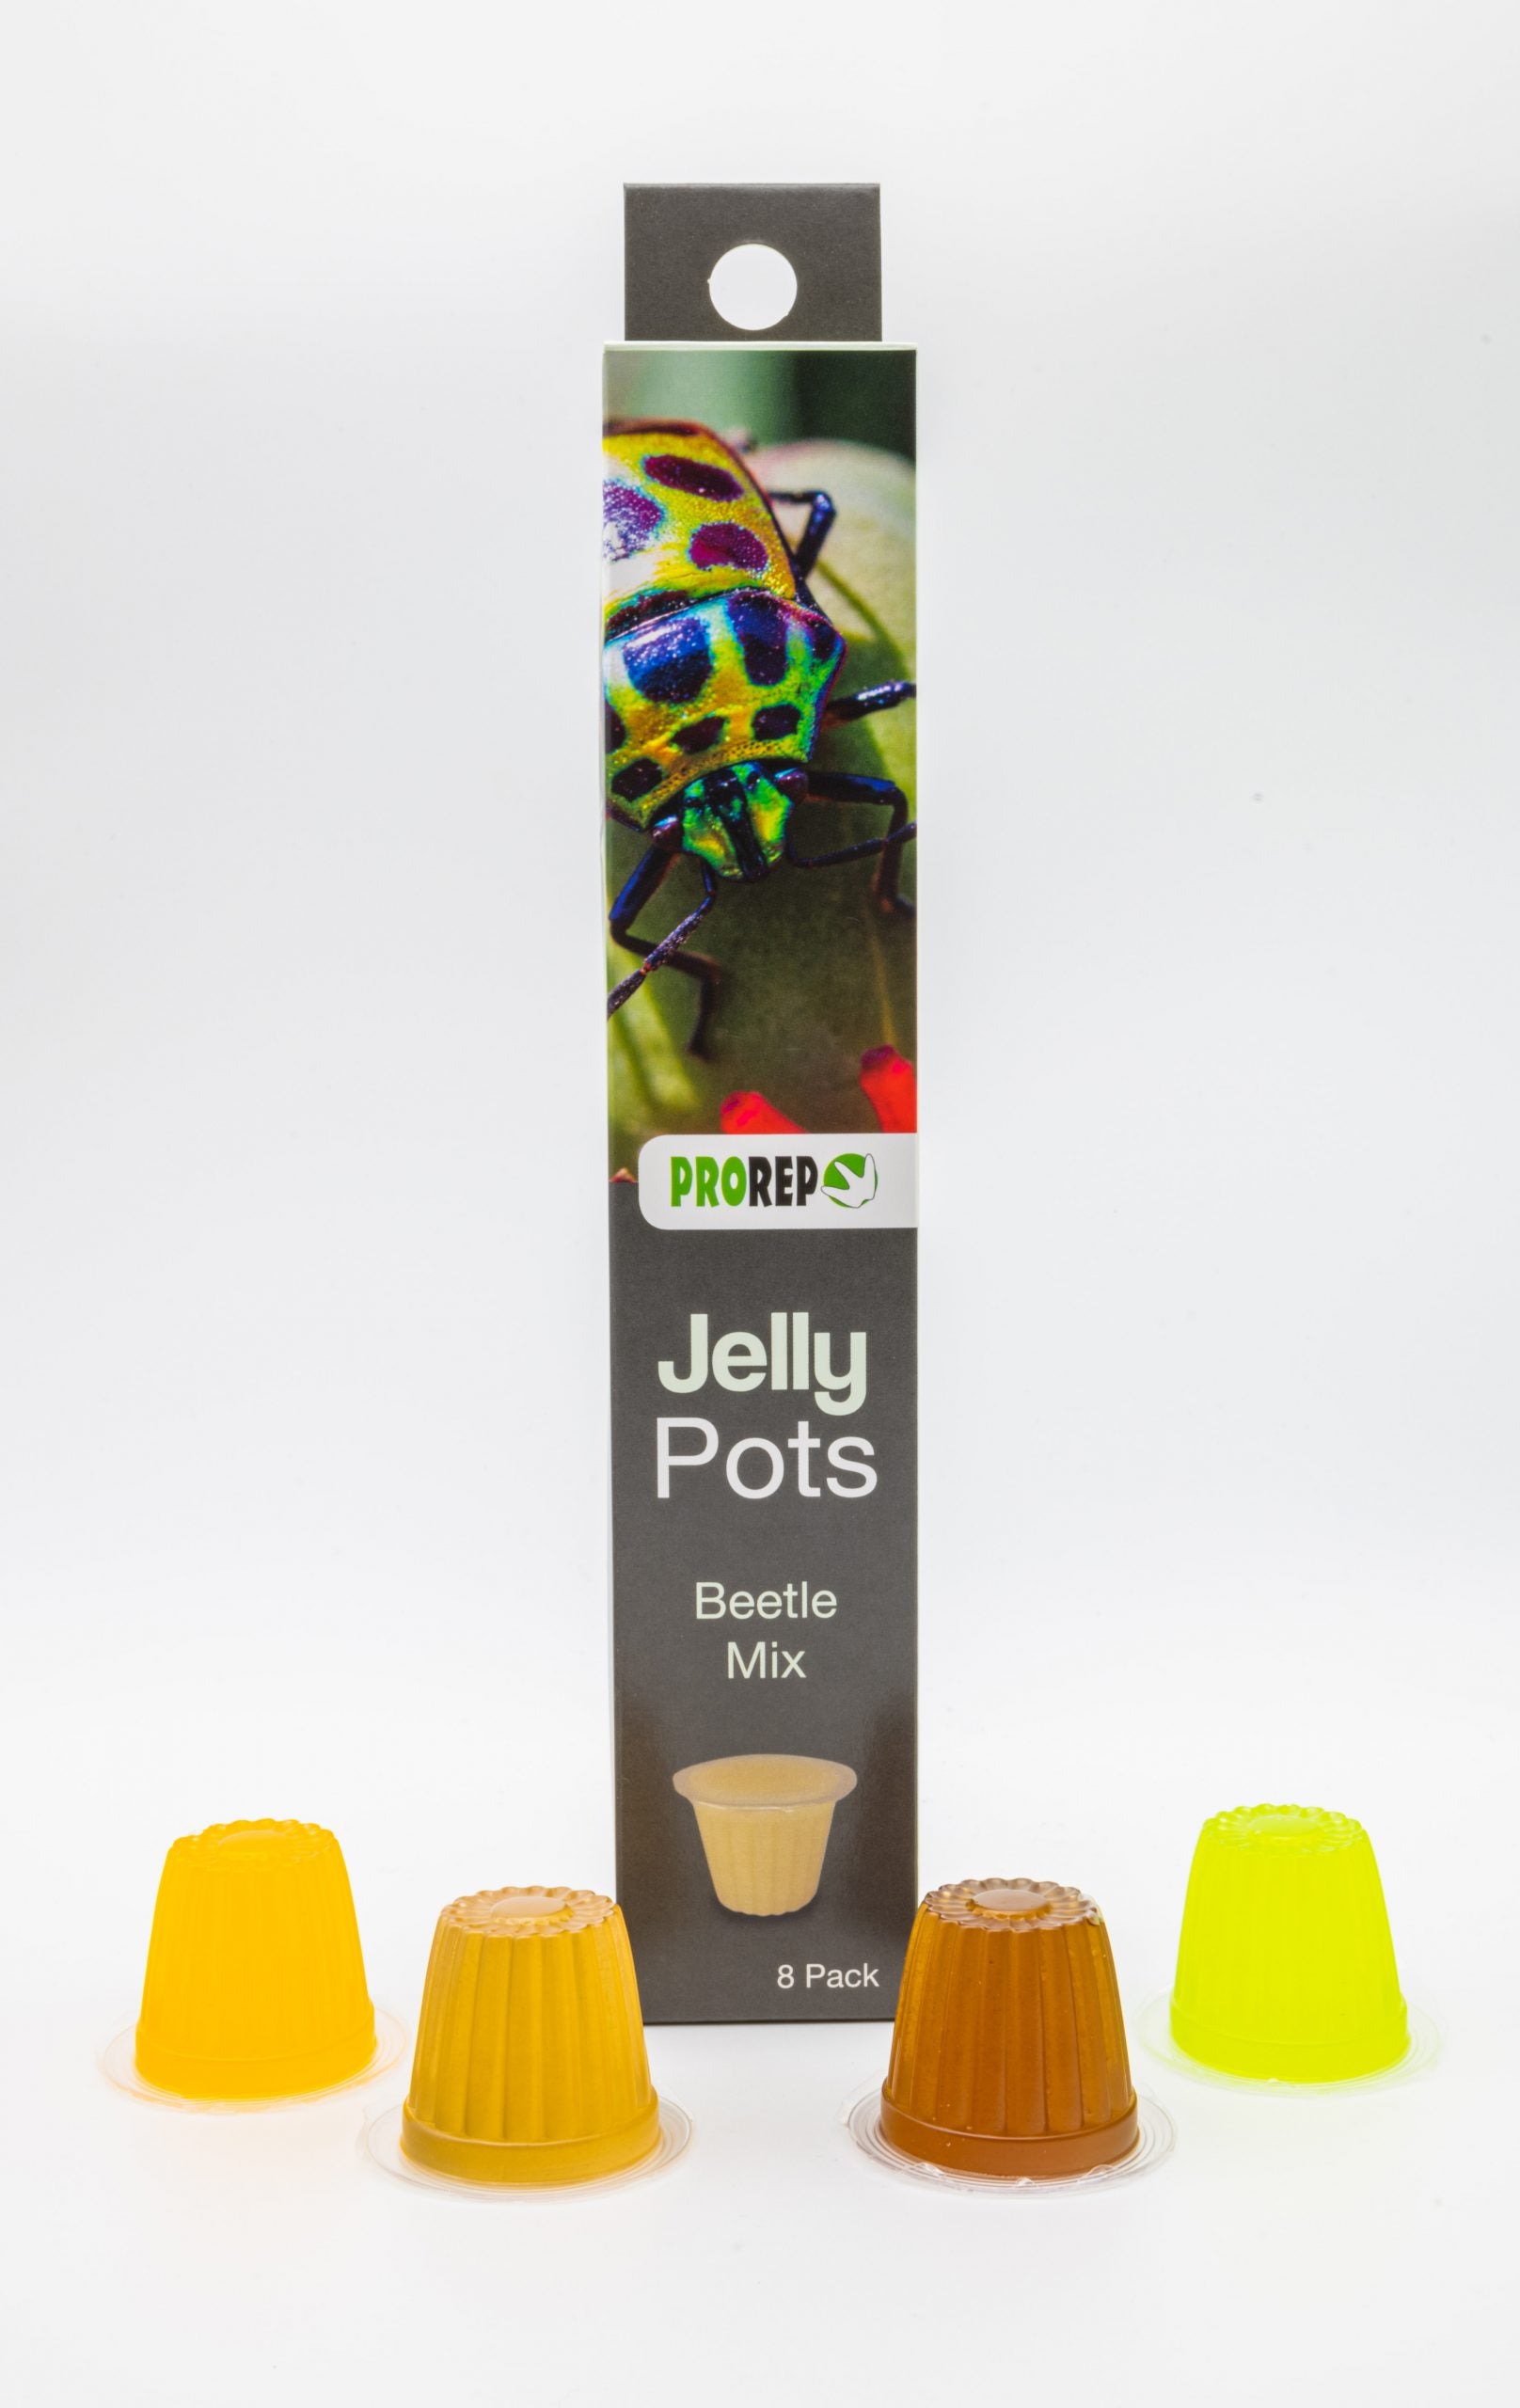 Jelly Pots, Beetle Mix 8-pack